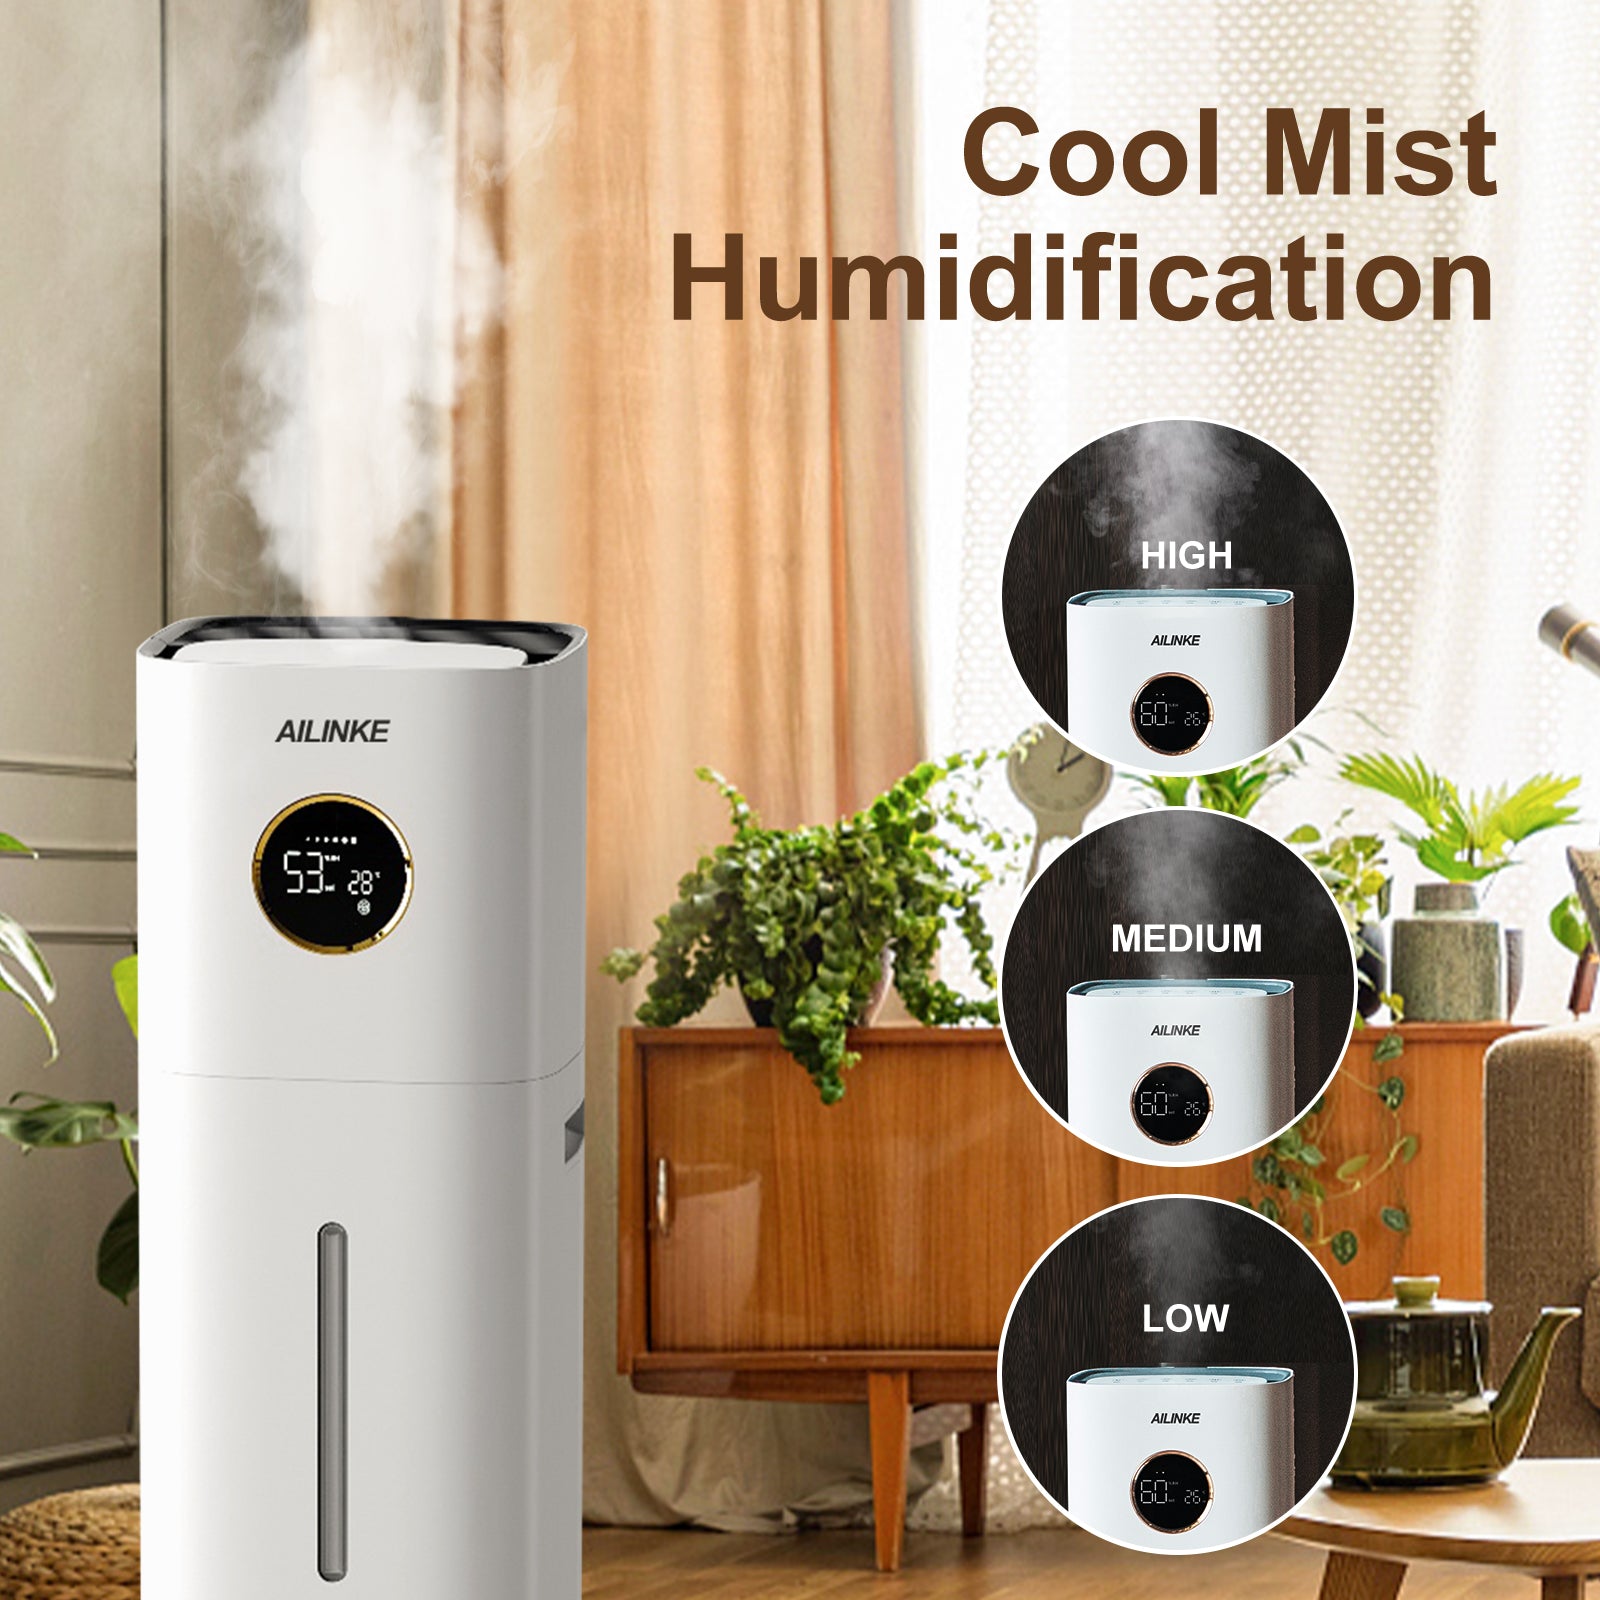 [MH-J36]AILINKE Humidifiers for Bedroom Large Room, 3.4Gal/13L Large Room Humidifiers for Home, Top Fill, Humidistat, Quiet, Aroma Box, Easy to Clean, White